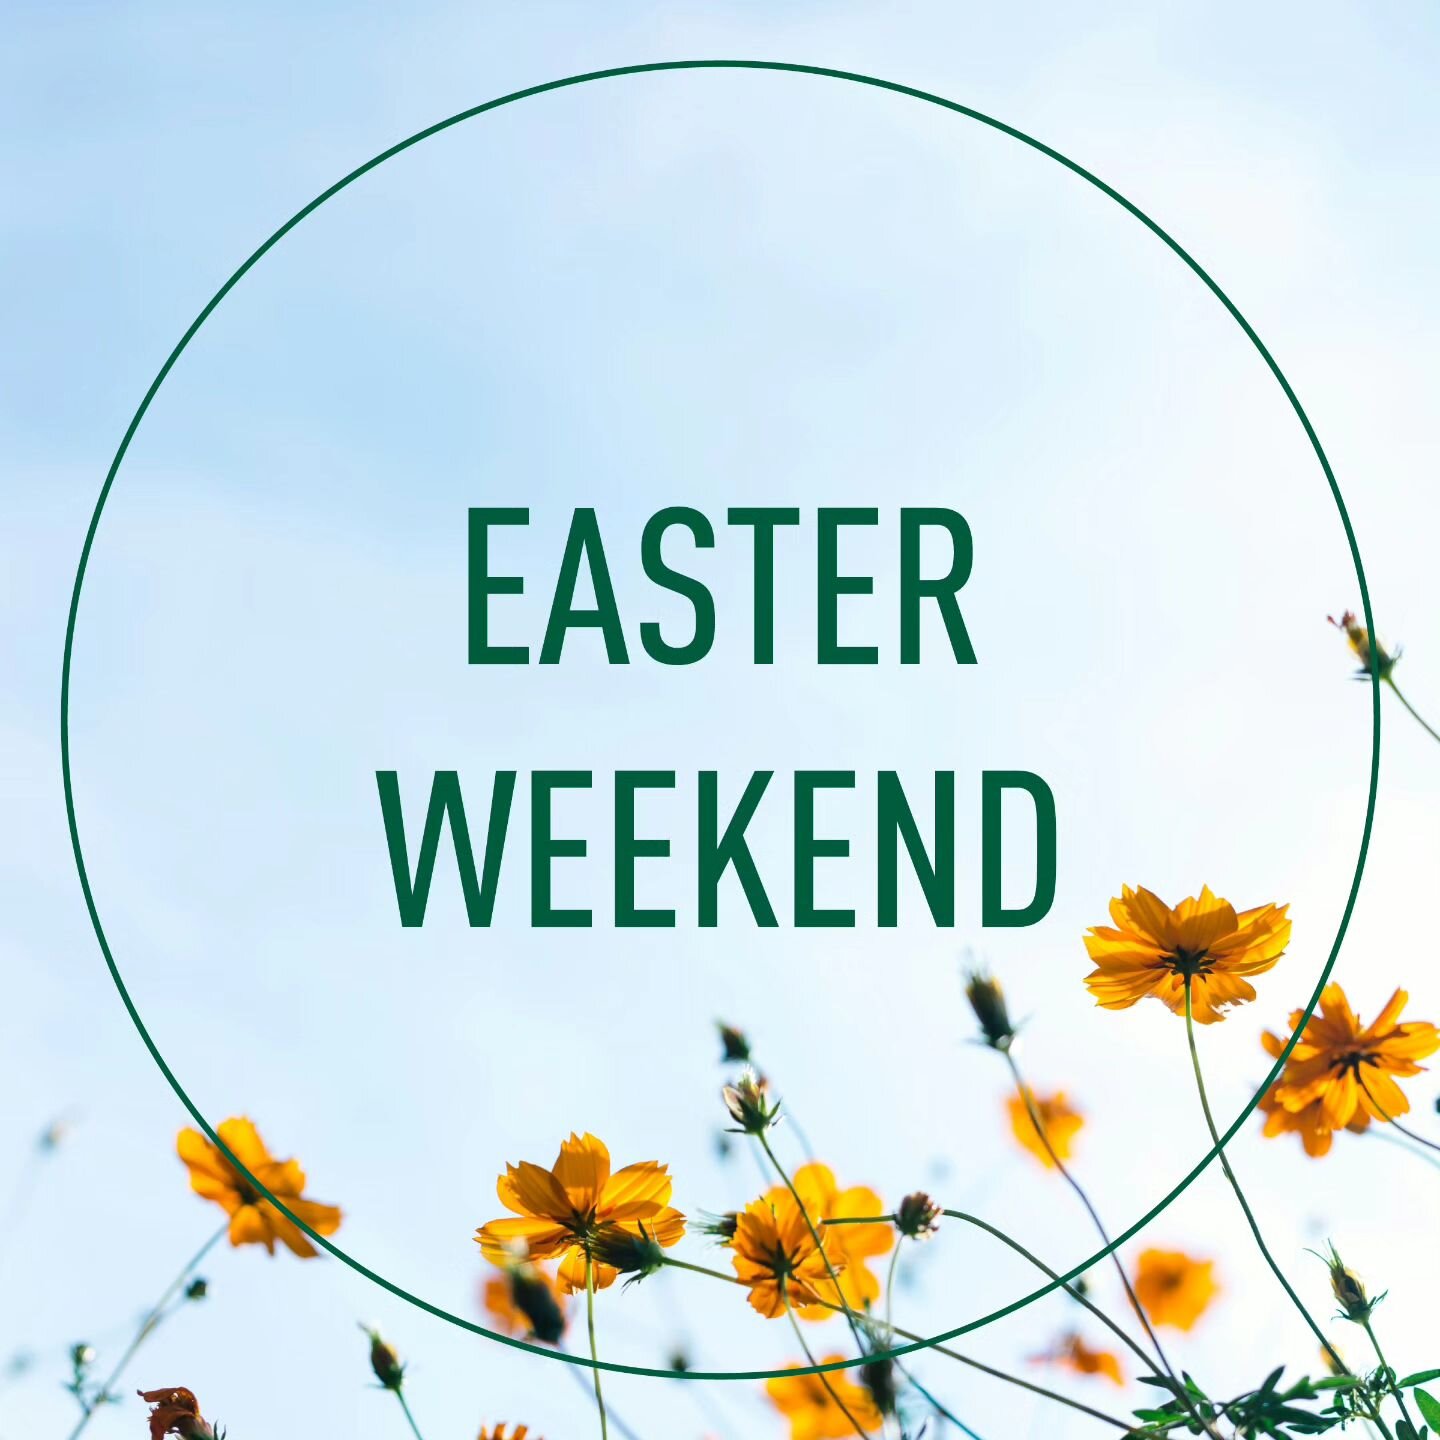 EASTER WEEKEND OPENING HOURS 

We'll all be enjoying a bit of a rest over the weekend, capitalising on the bank holidays (🙏🏻 for ☀️)

Well be closed on Good Friday, Easter Sunday and Easter Monday. 

Both shops OPEN AS USUAL ON SATURDAY though.

We